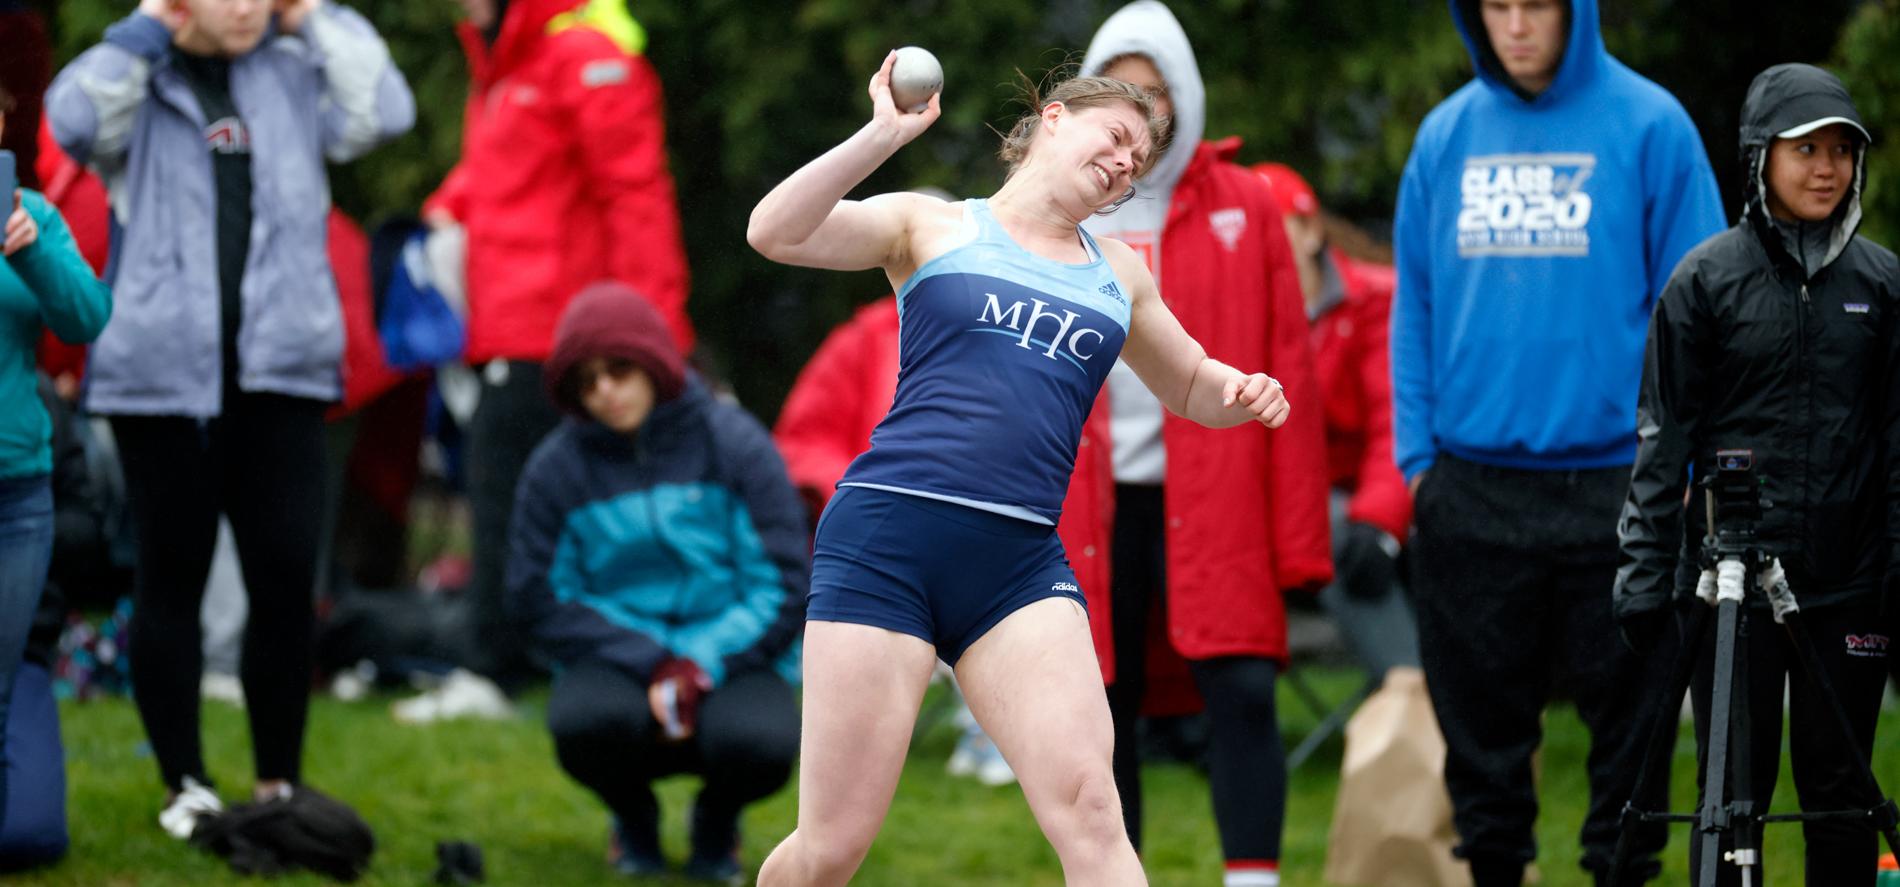 Emma Doyle had a top effort of 11.08 meters in the shot put in her final competition for Mount Holyoke track and field on May 13, 2023 at the NEICAAA Championships in Dedham, Mass. (File photo by Frank Poulin / Courtesy MIT)